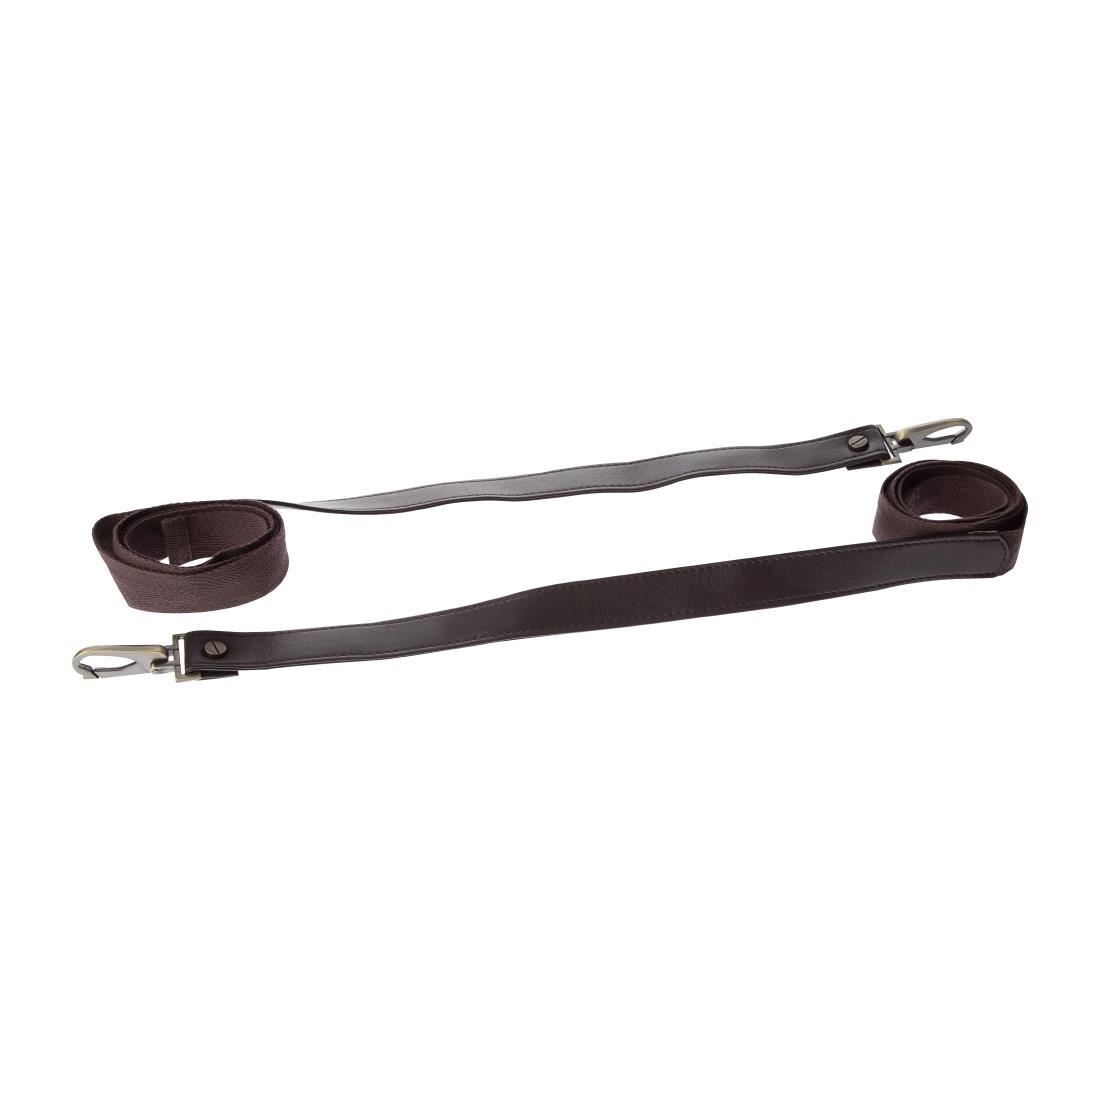 Southside Apron Spare Doghook PU strap Chocolate (2 pack) - FT608  - 4